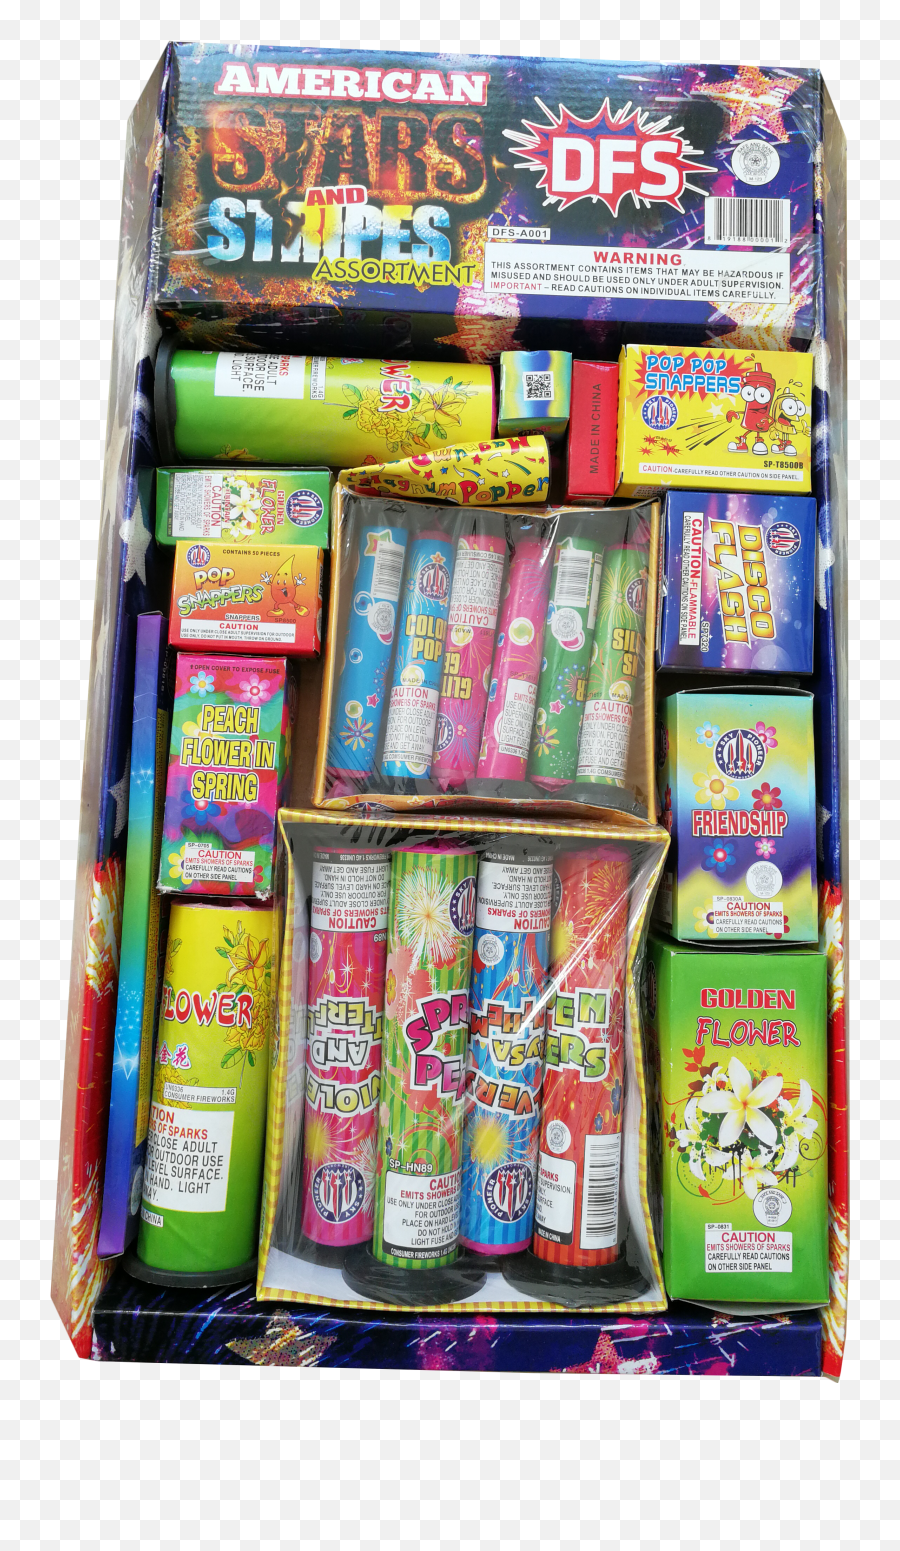 American Stars And Stripes U2013 Discount Fireworks Superstore Png